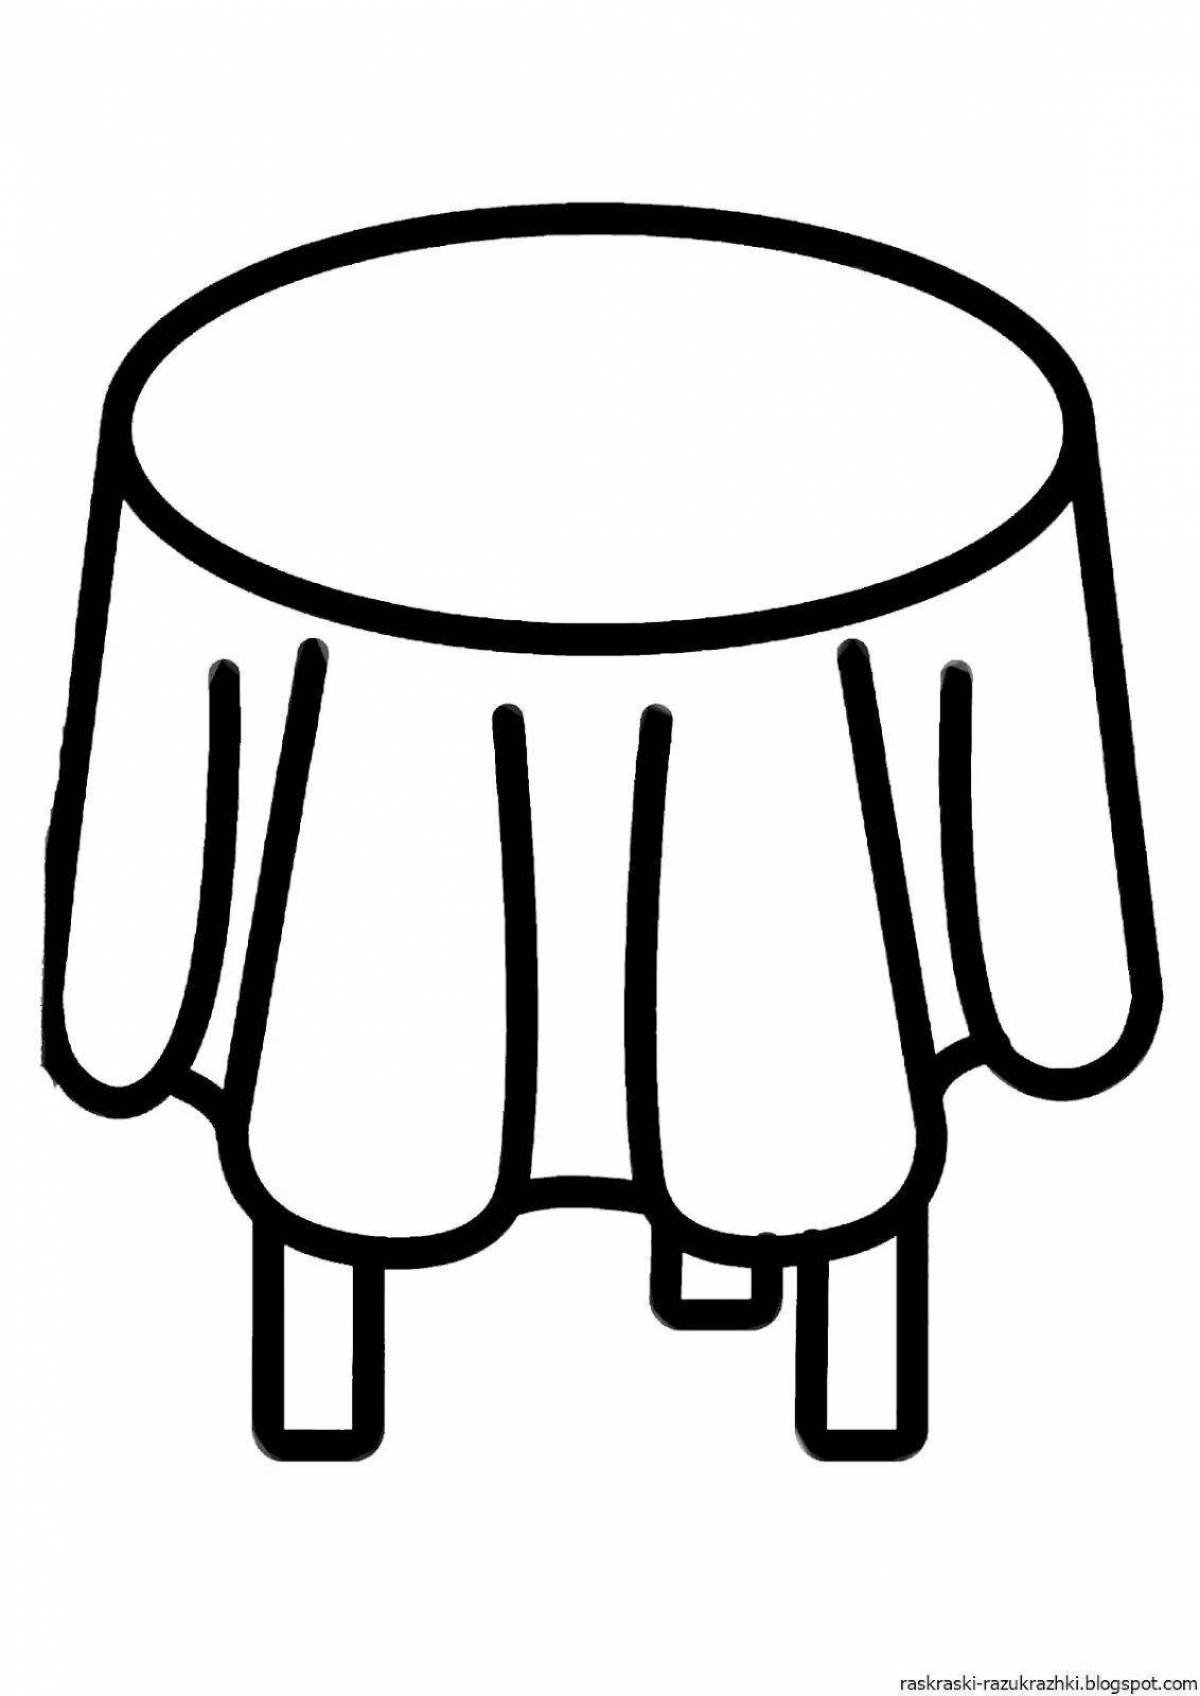 Fun furniture coloring for 2-3 year olds